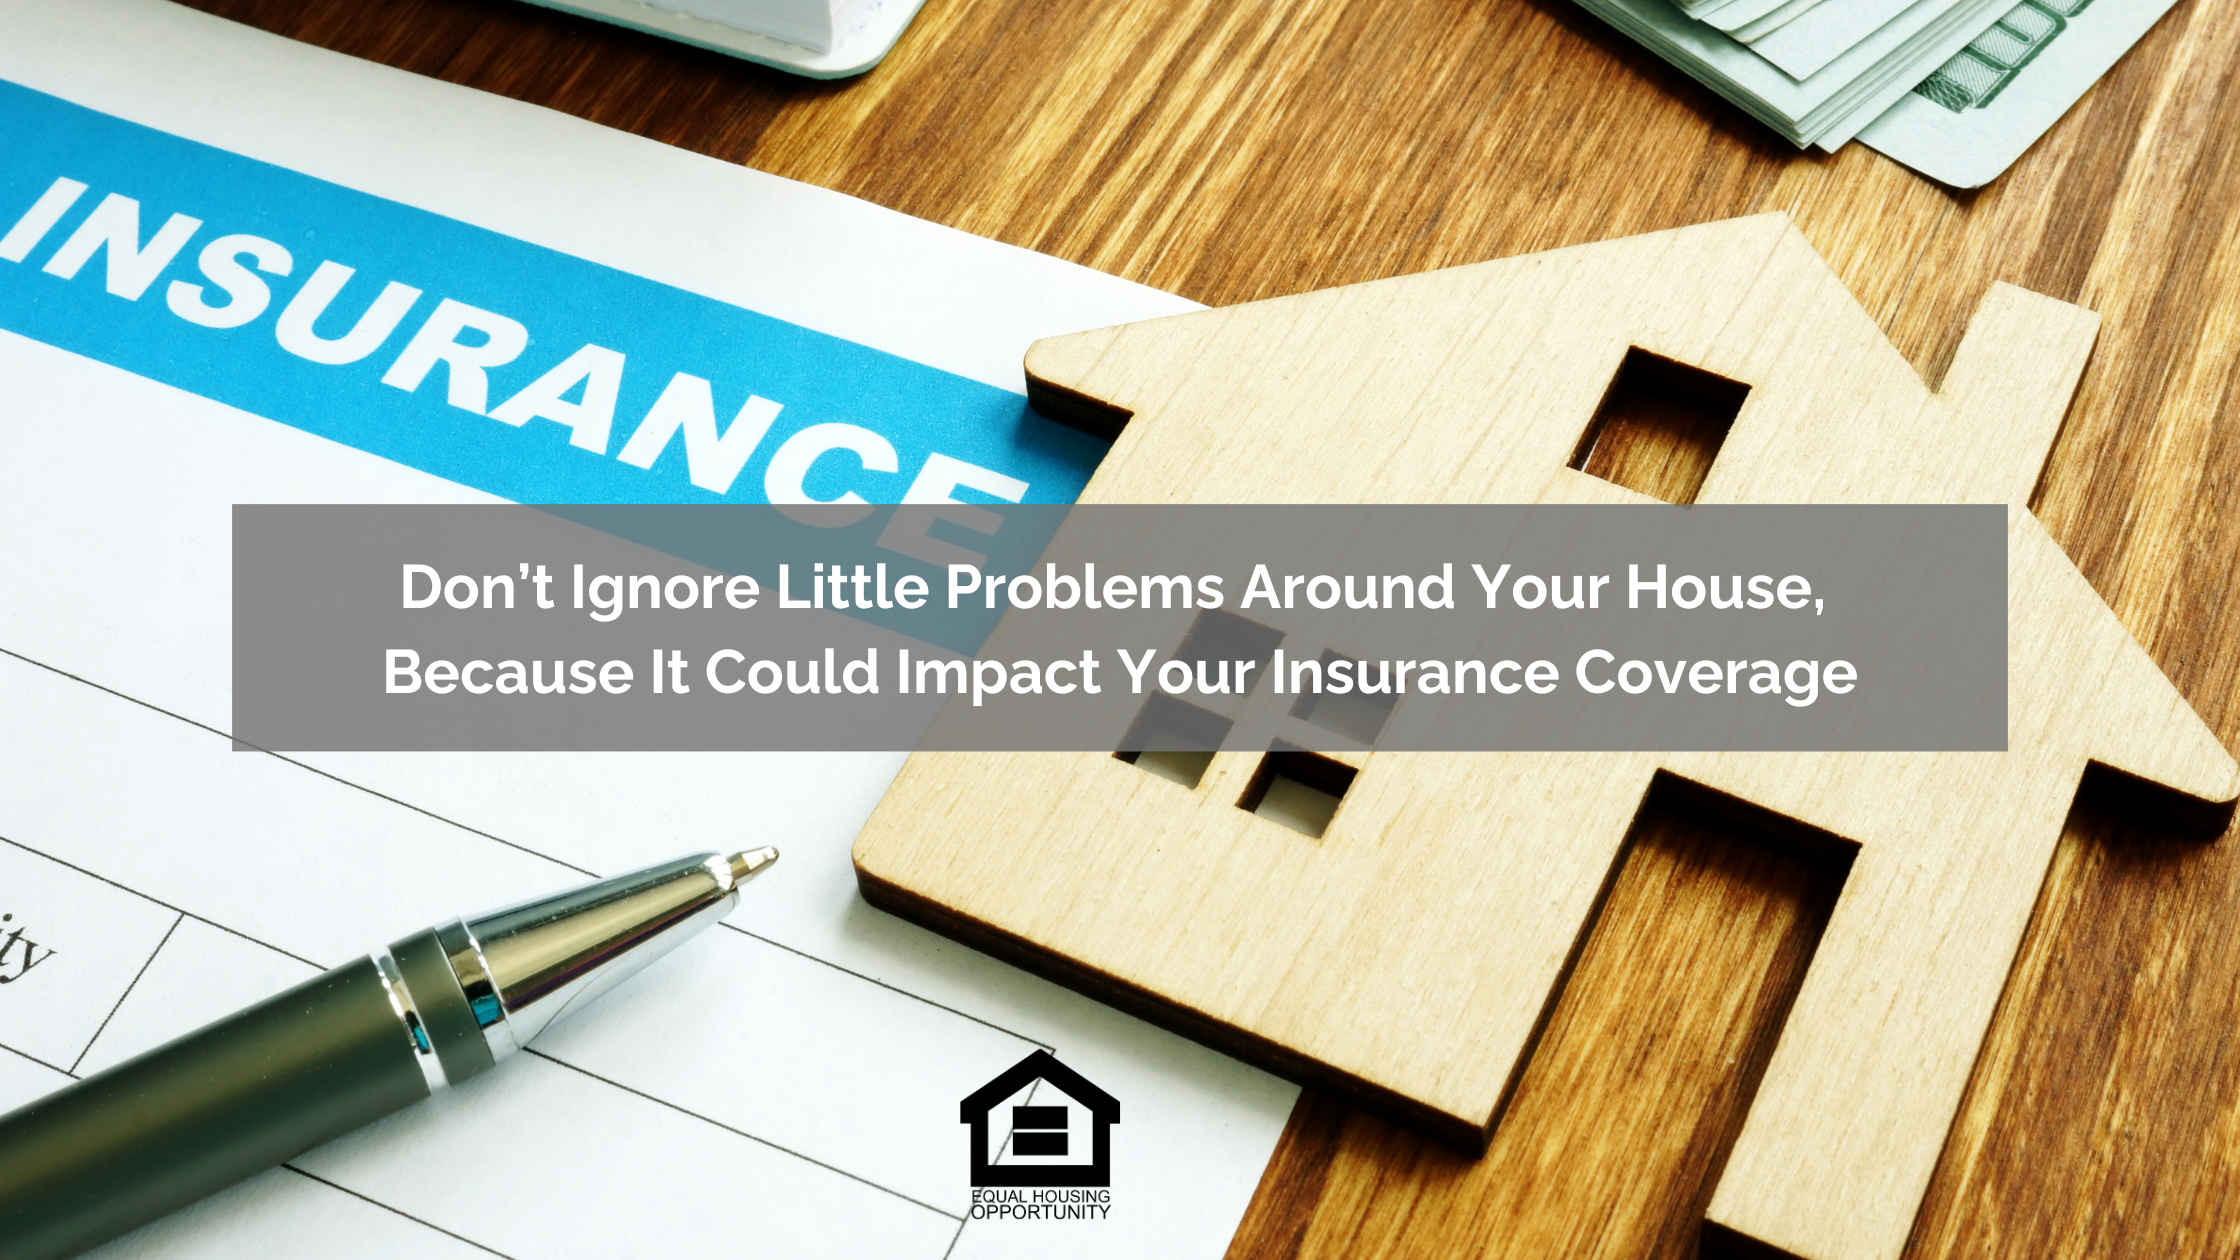 Don’t Ignore Little Problems Around Your House, Because It Could Impact Your Insurance Coverage